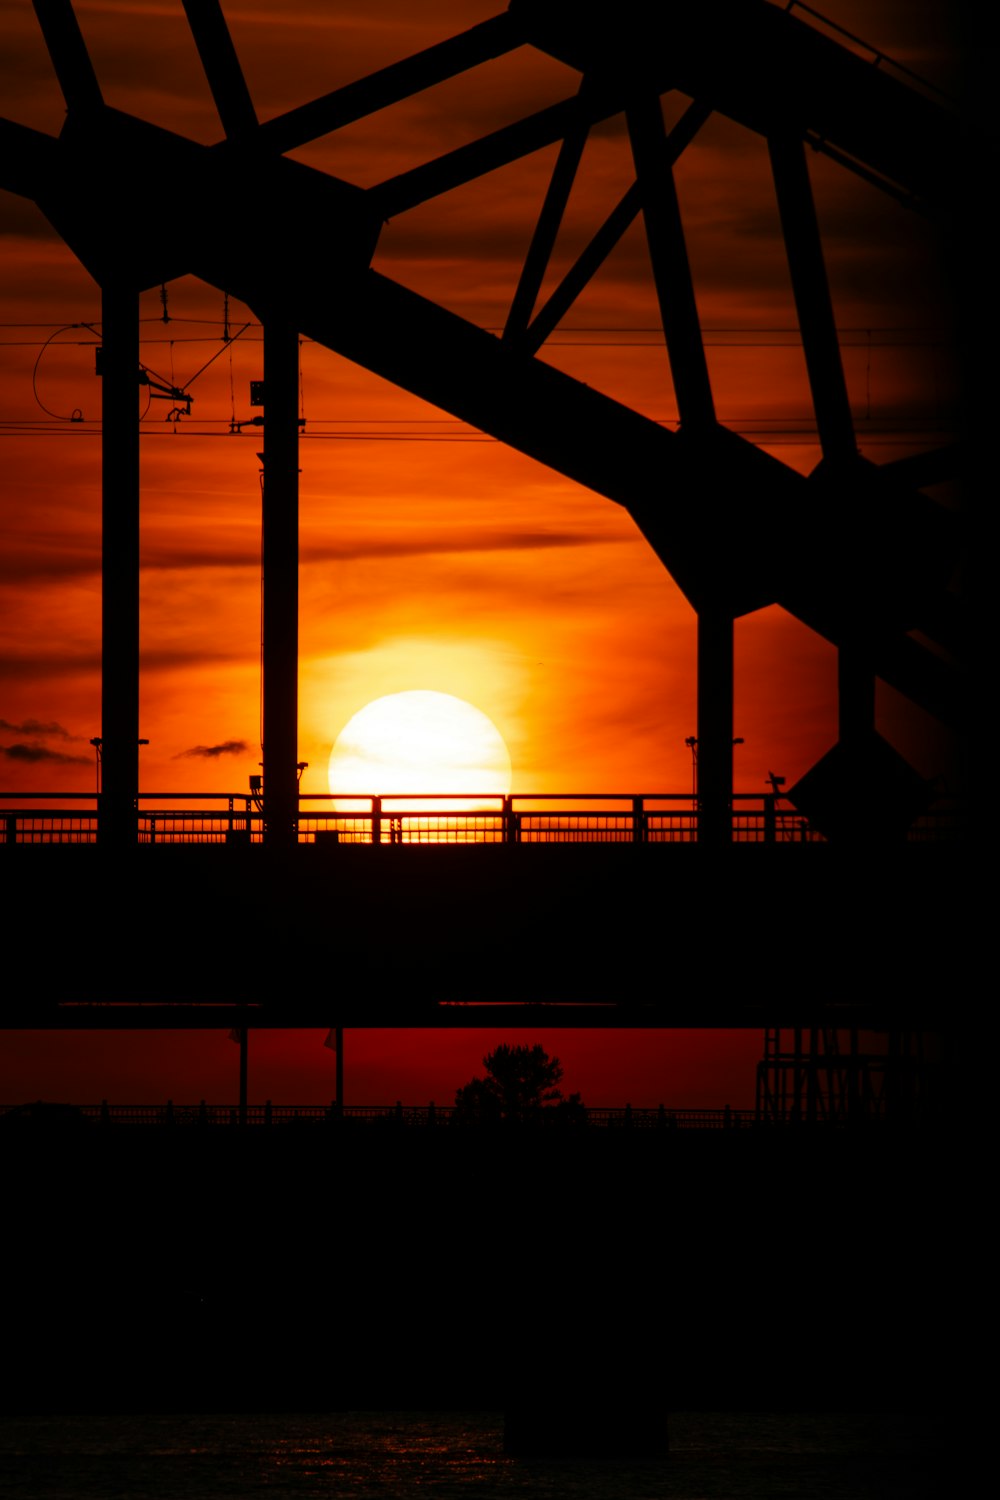 the sun is setting over a bridge over water